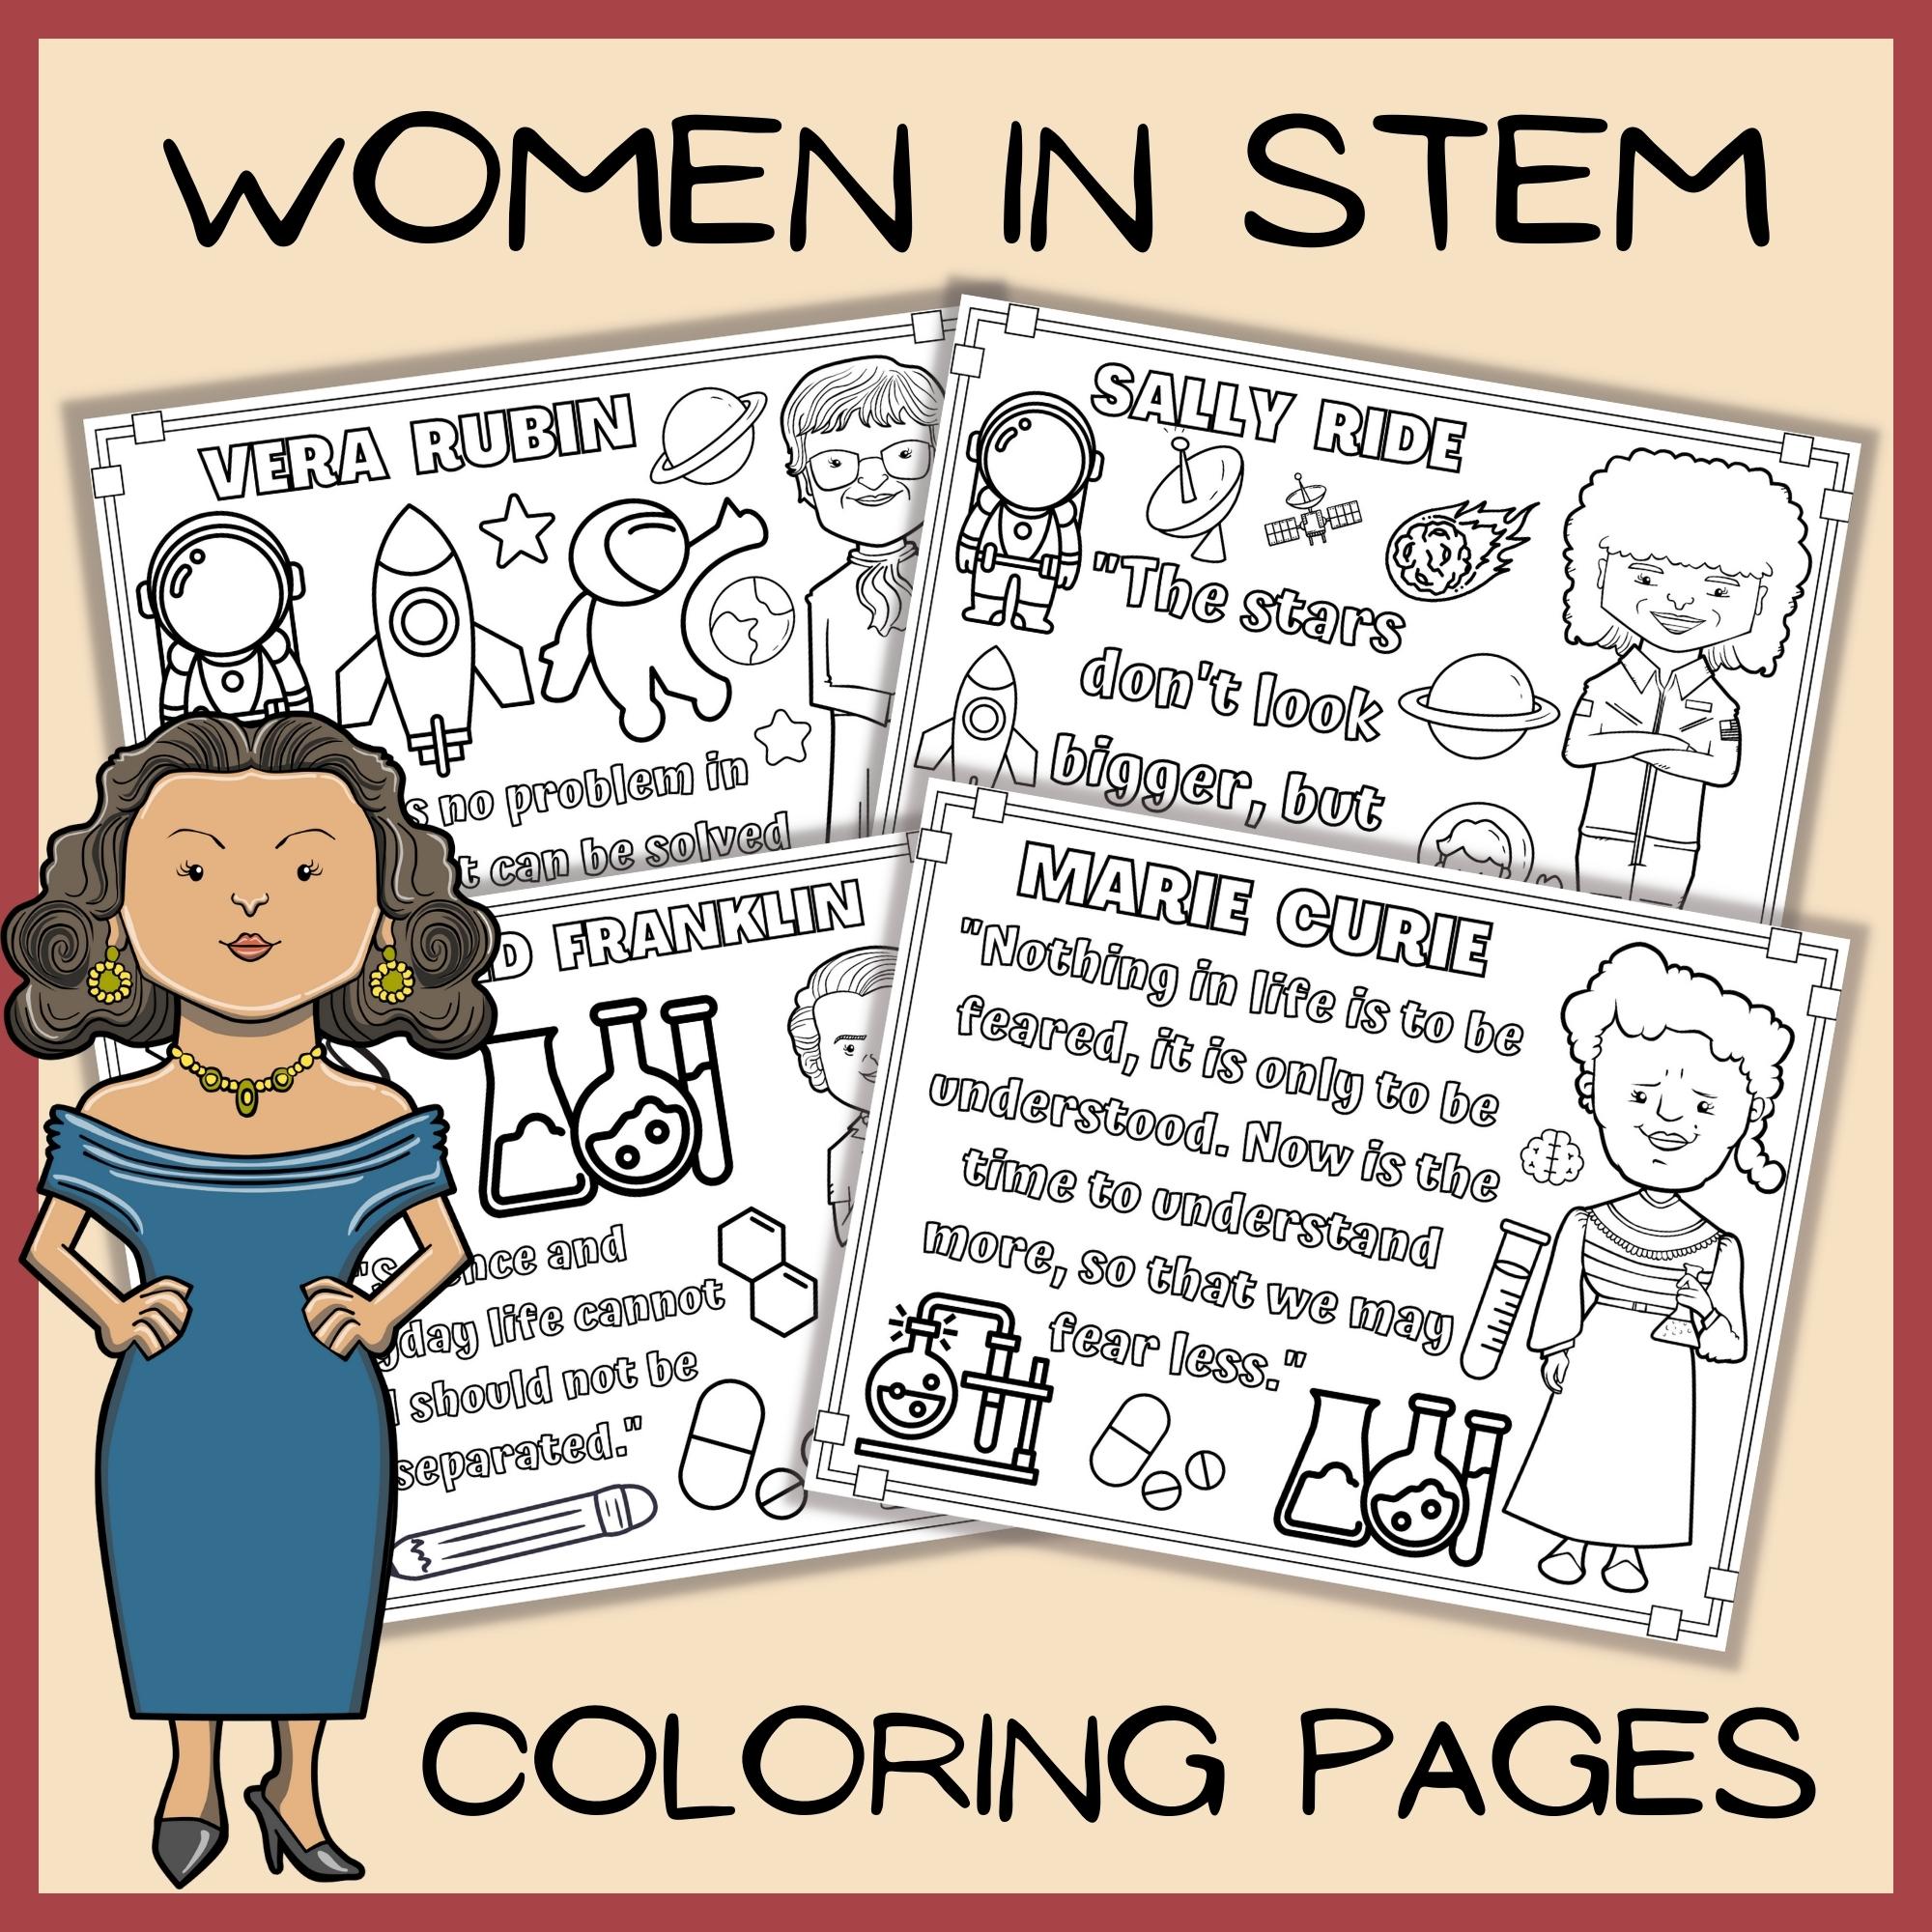 Womens history month coloring sheets famous women in stem coloring pages set made by teachers